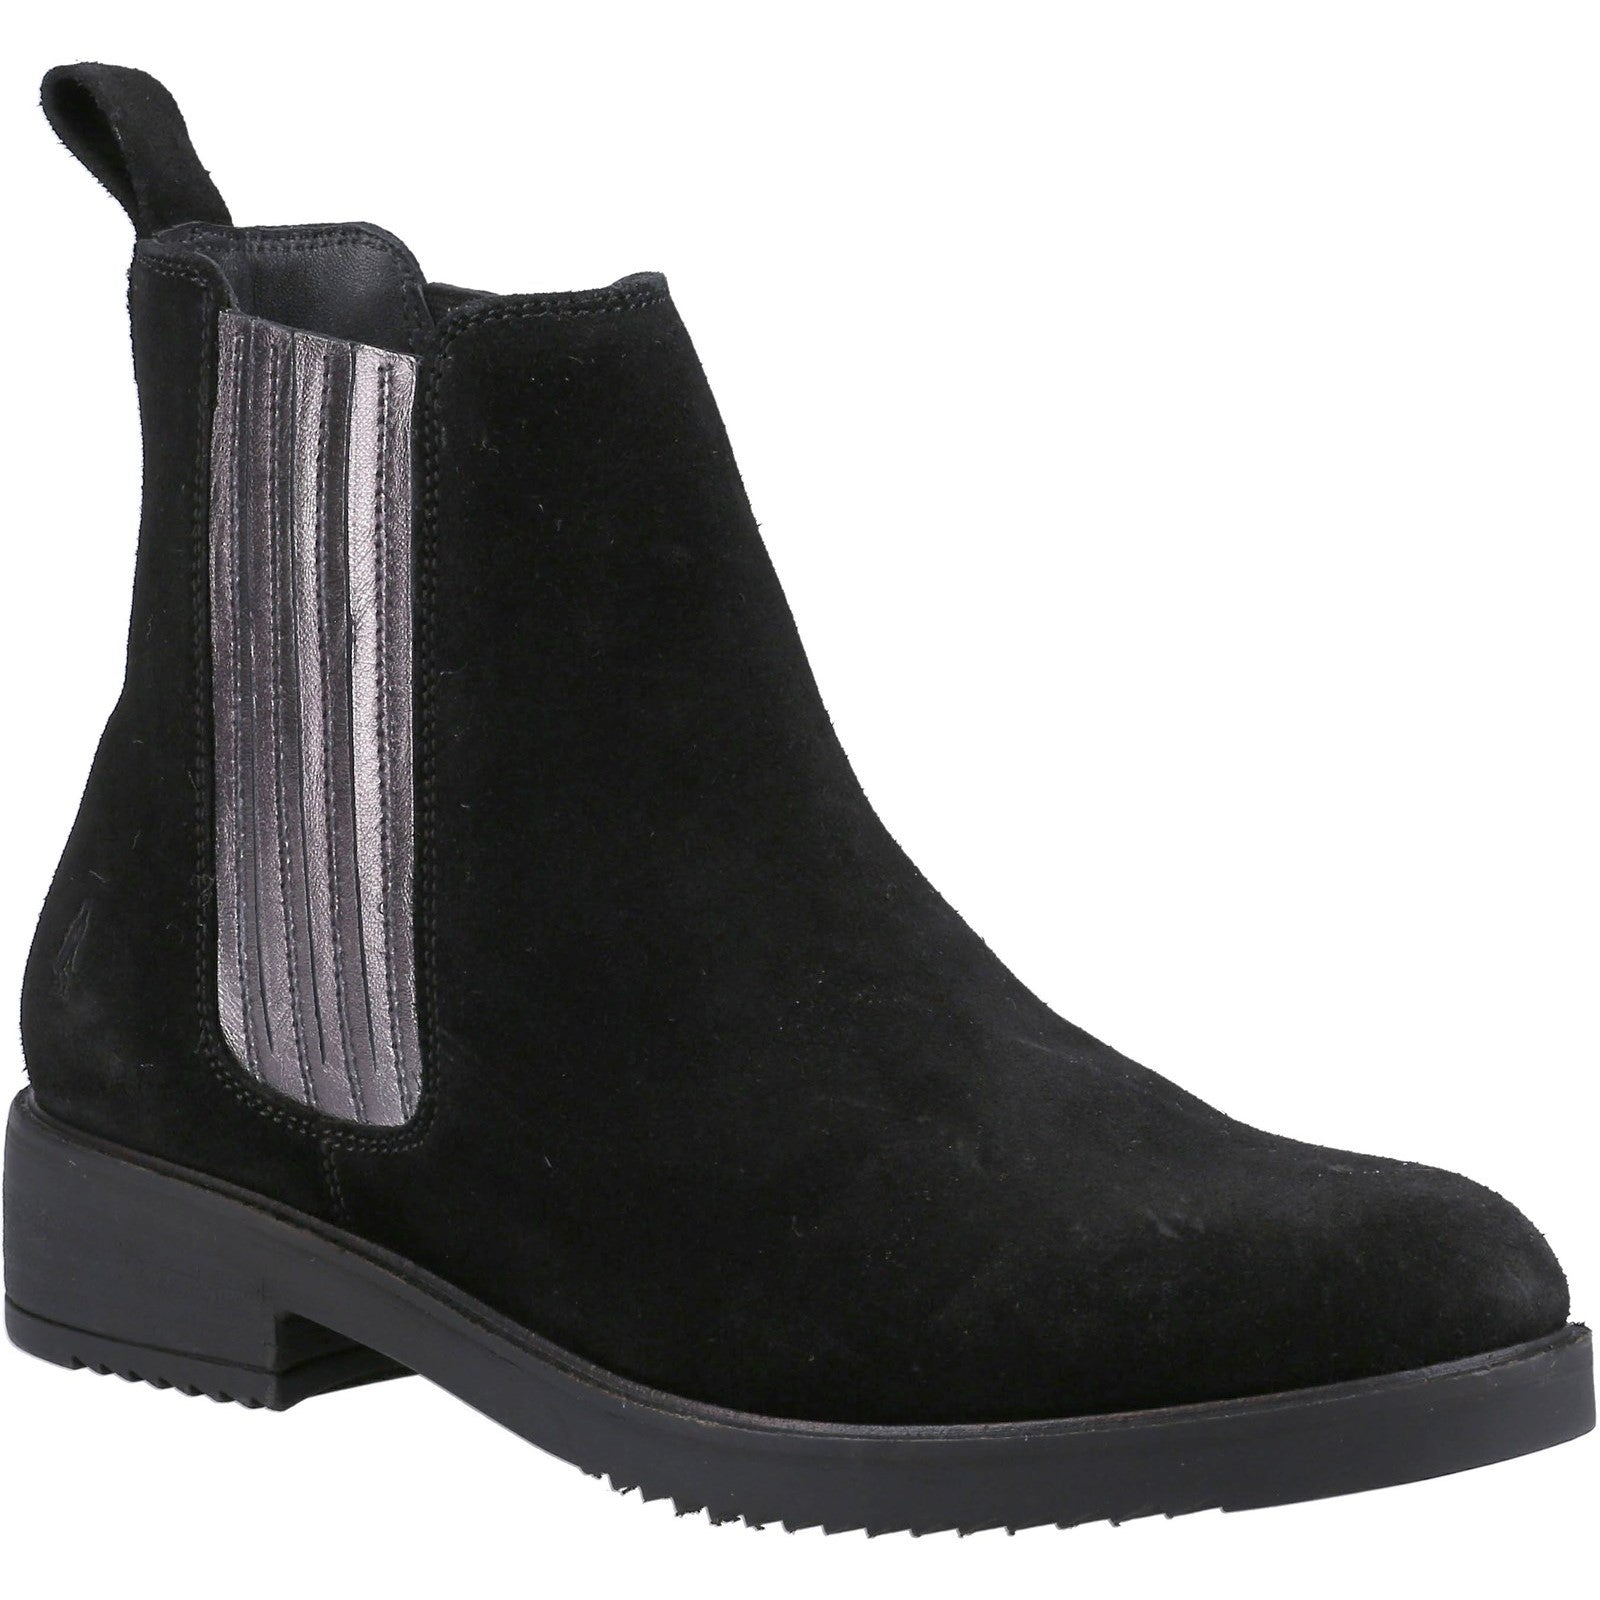 Hush Puppies Stella Ankle Boot